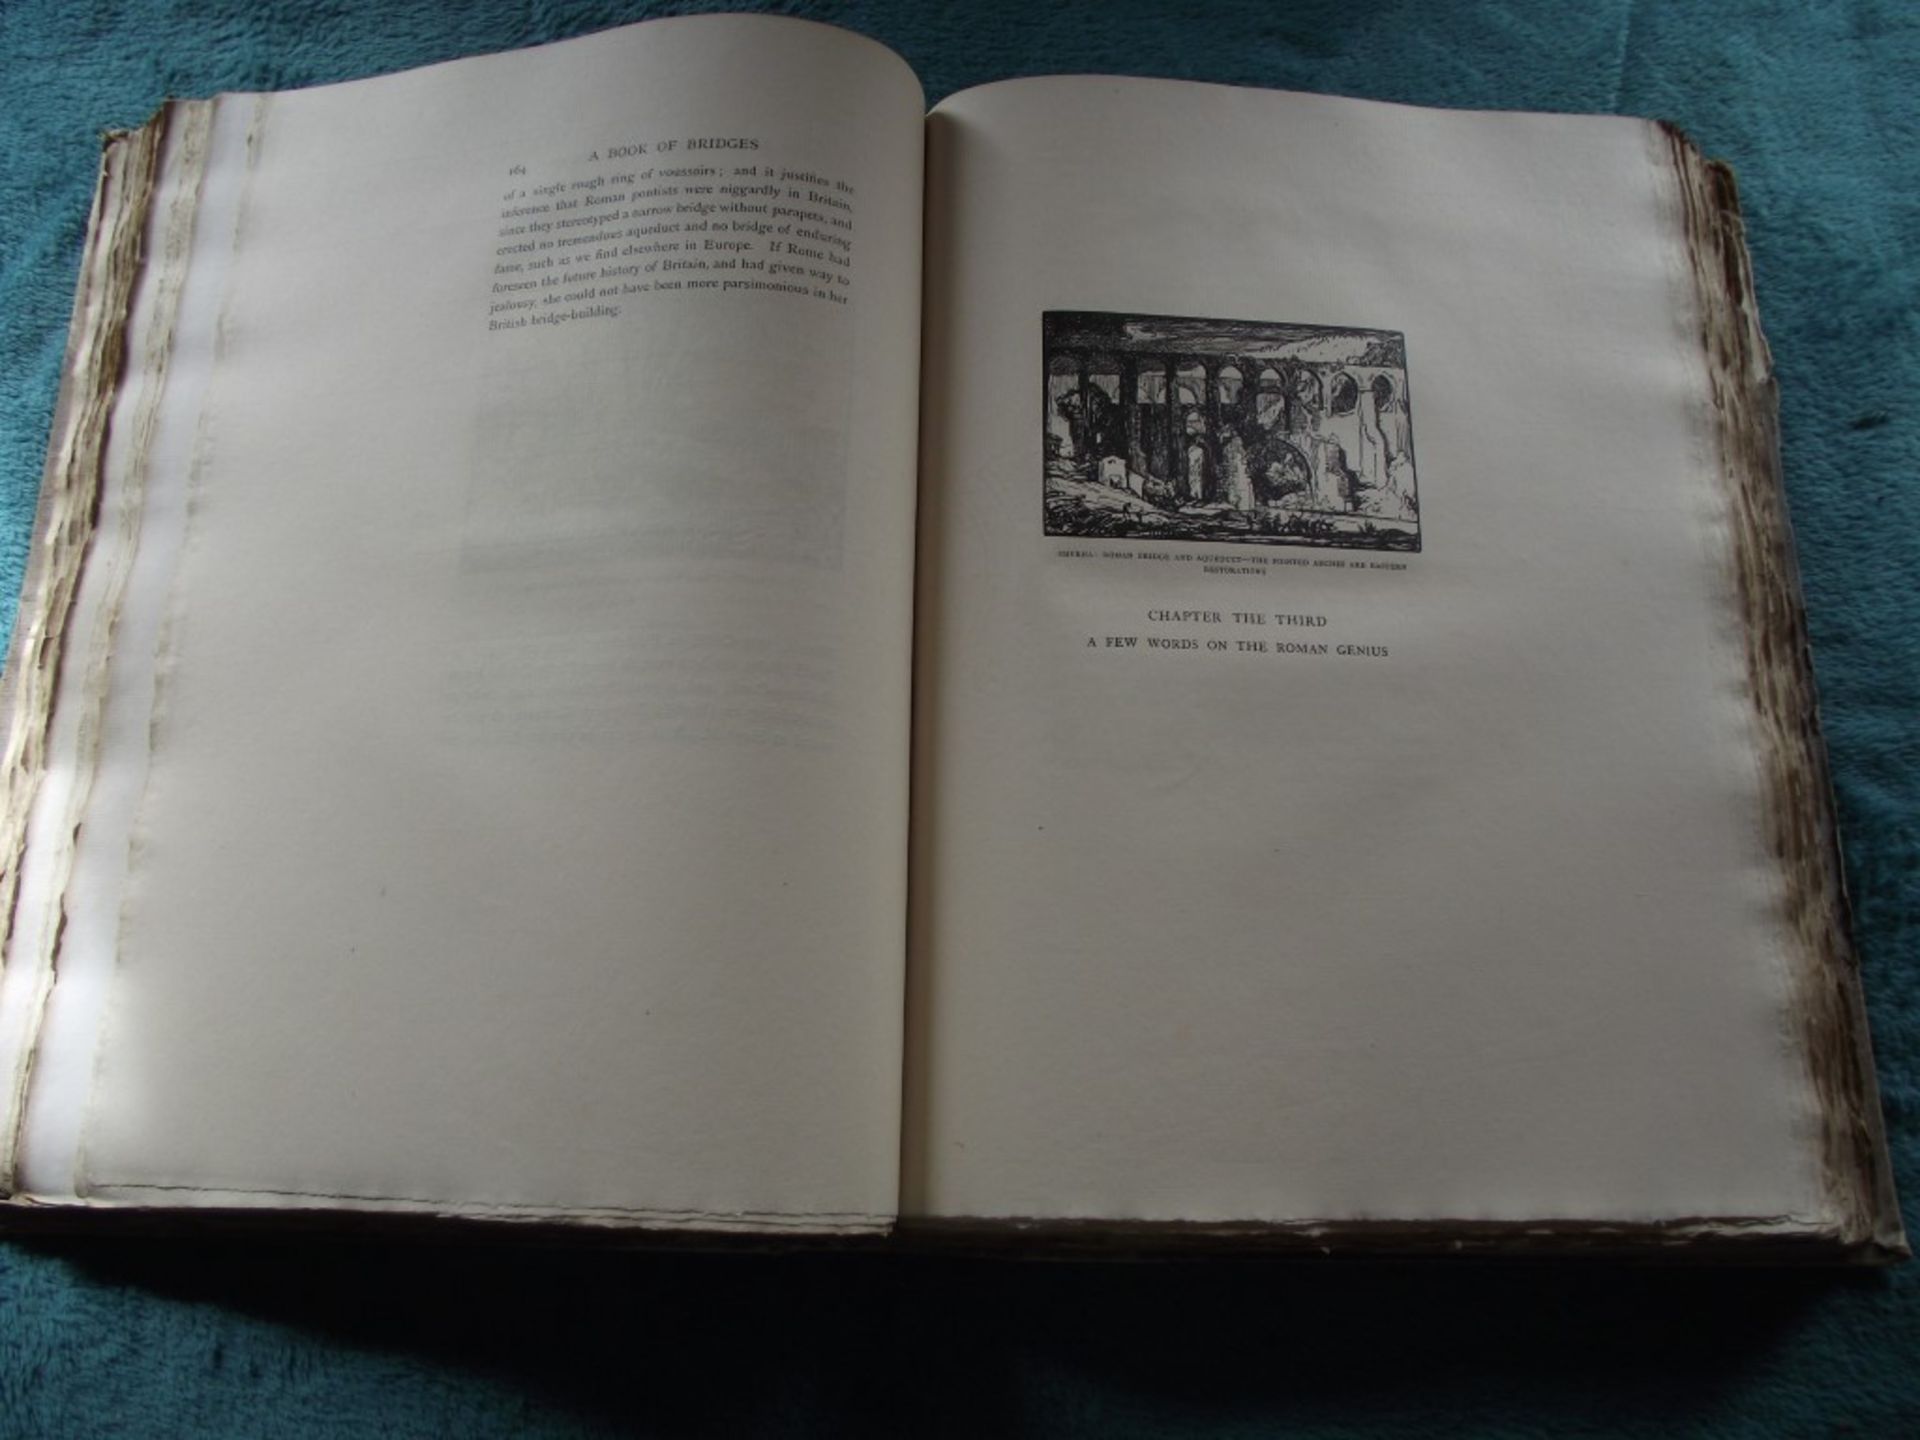 A Book of Bridges by Frank Brangwyn & Walter Shaw Sparrow - Ltd. Edit. 17/75 with Signed Lithograph. - Image 37 of 64